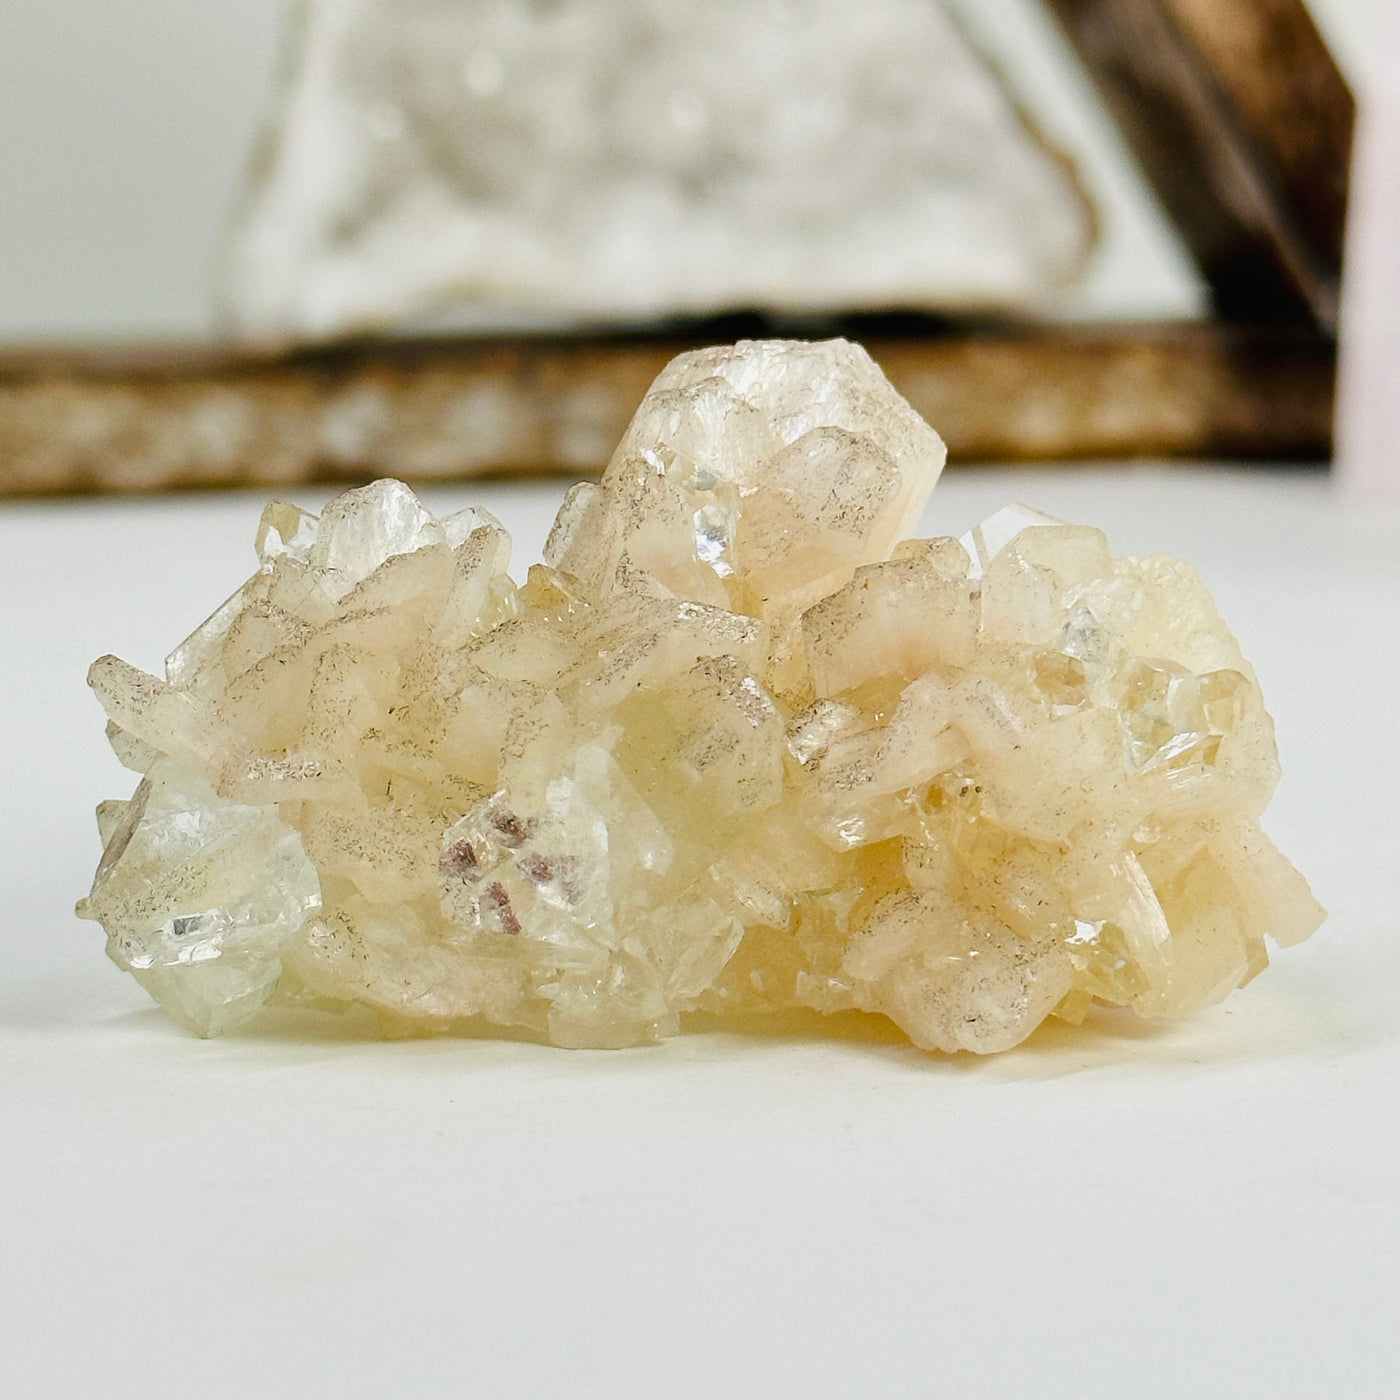 apophyllite with stilbite with decorations in the background